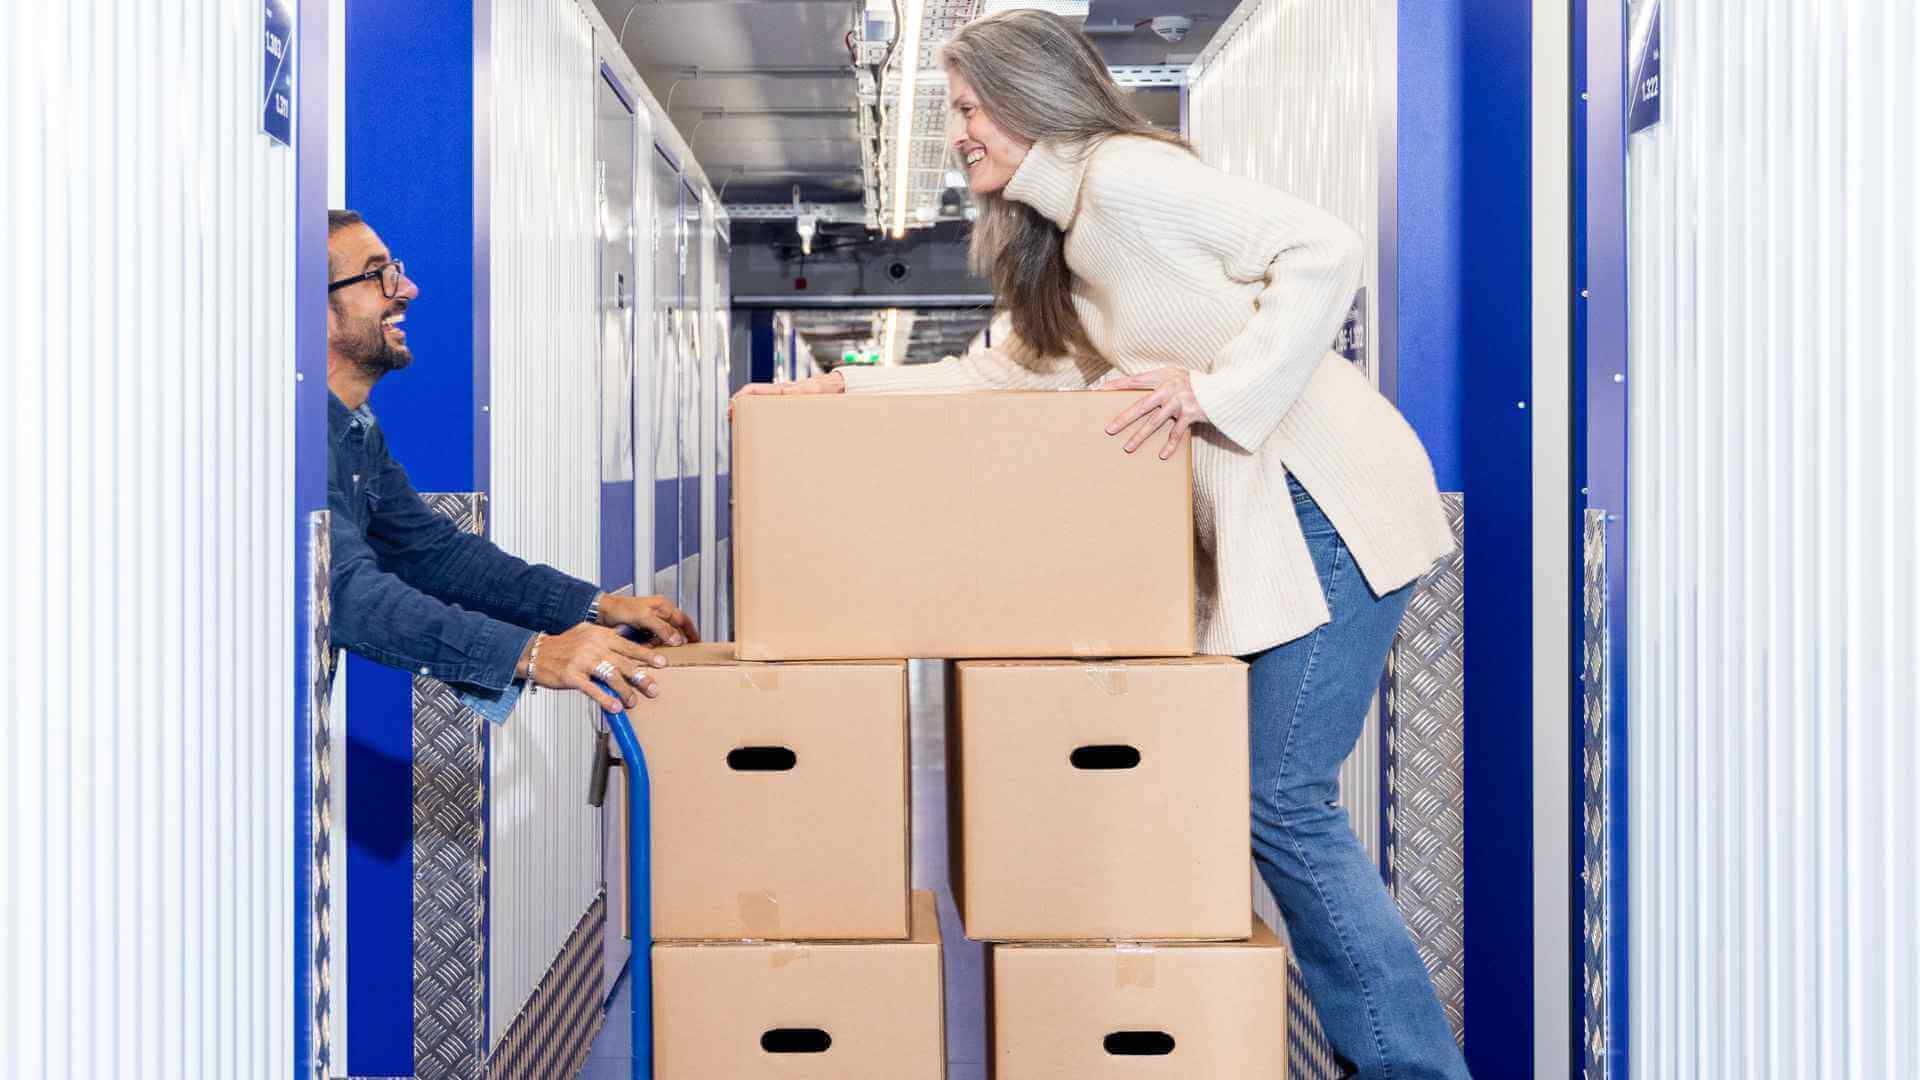 Your guide to renting storage space: What you need to know